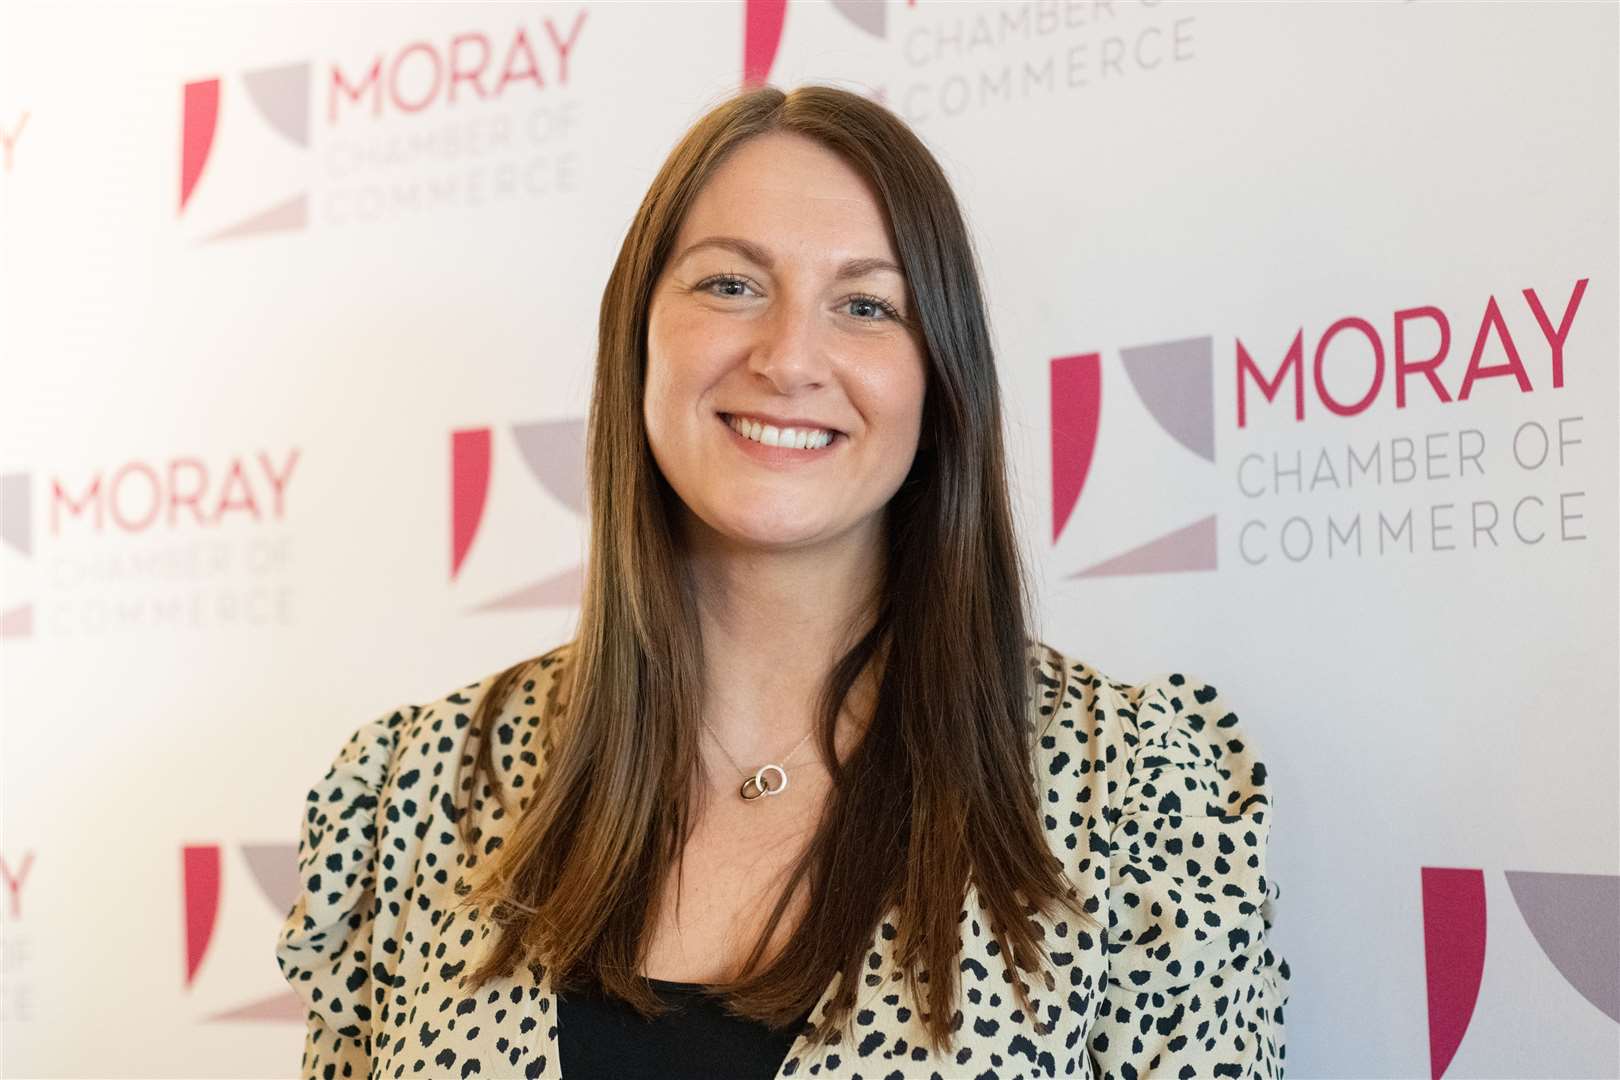 Chief Executive Officer of Moray Chamber of Commerce, Sarah Medcraf. Picture: Daniel Forsyth